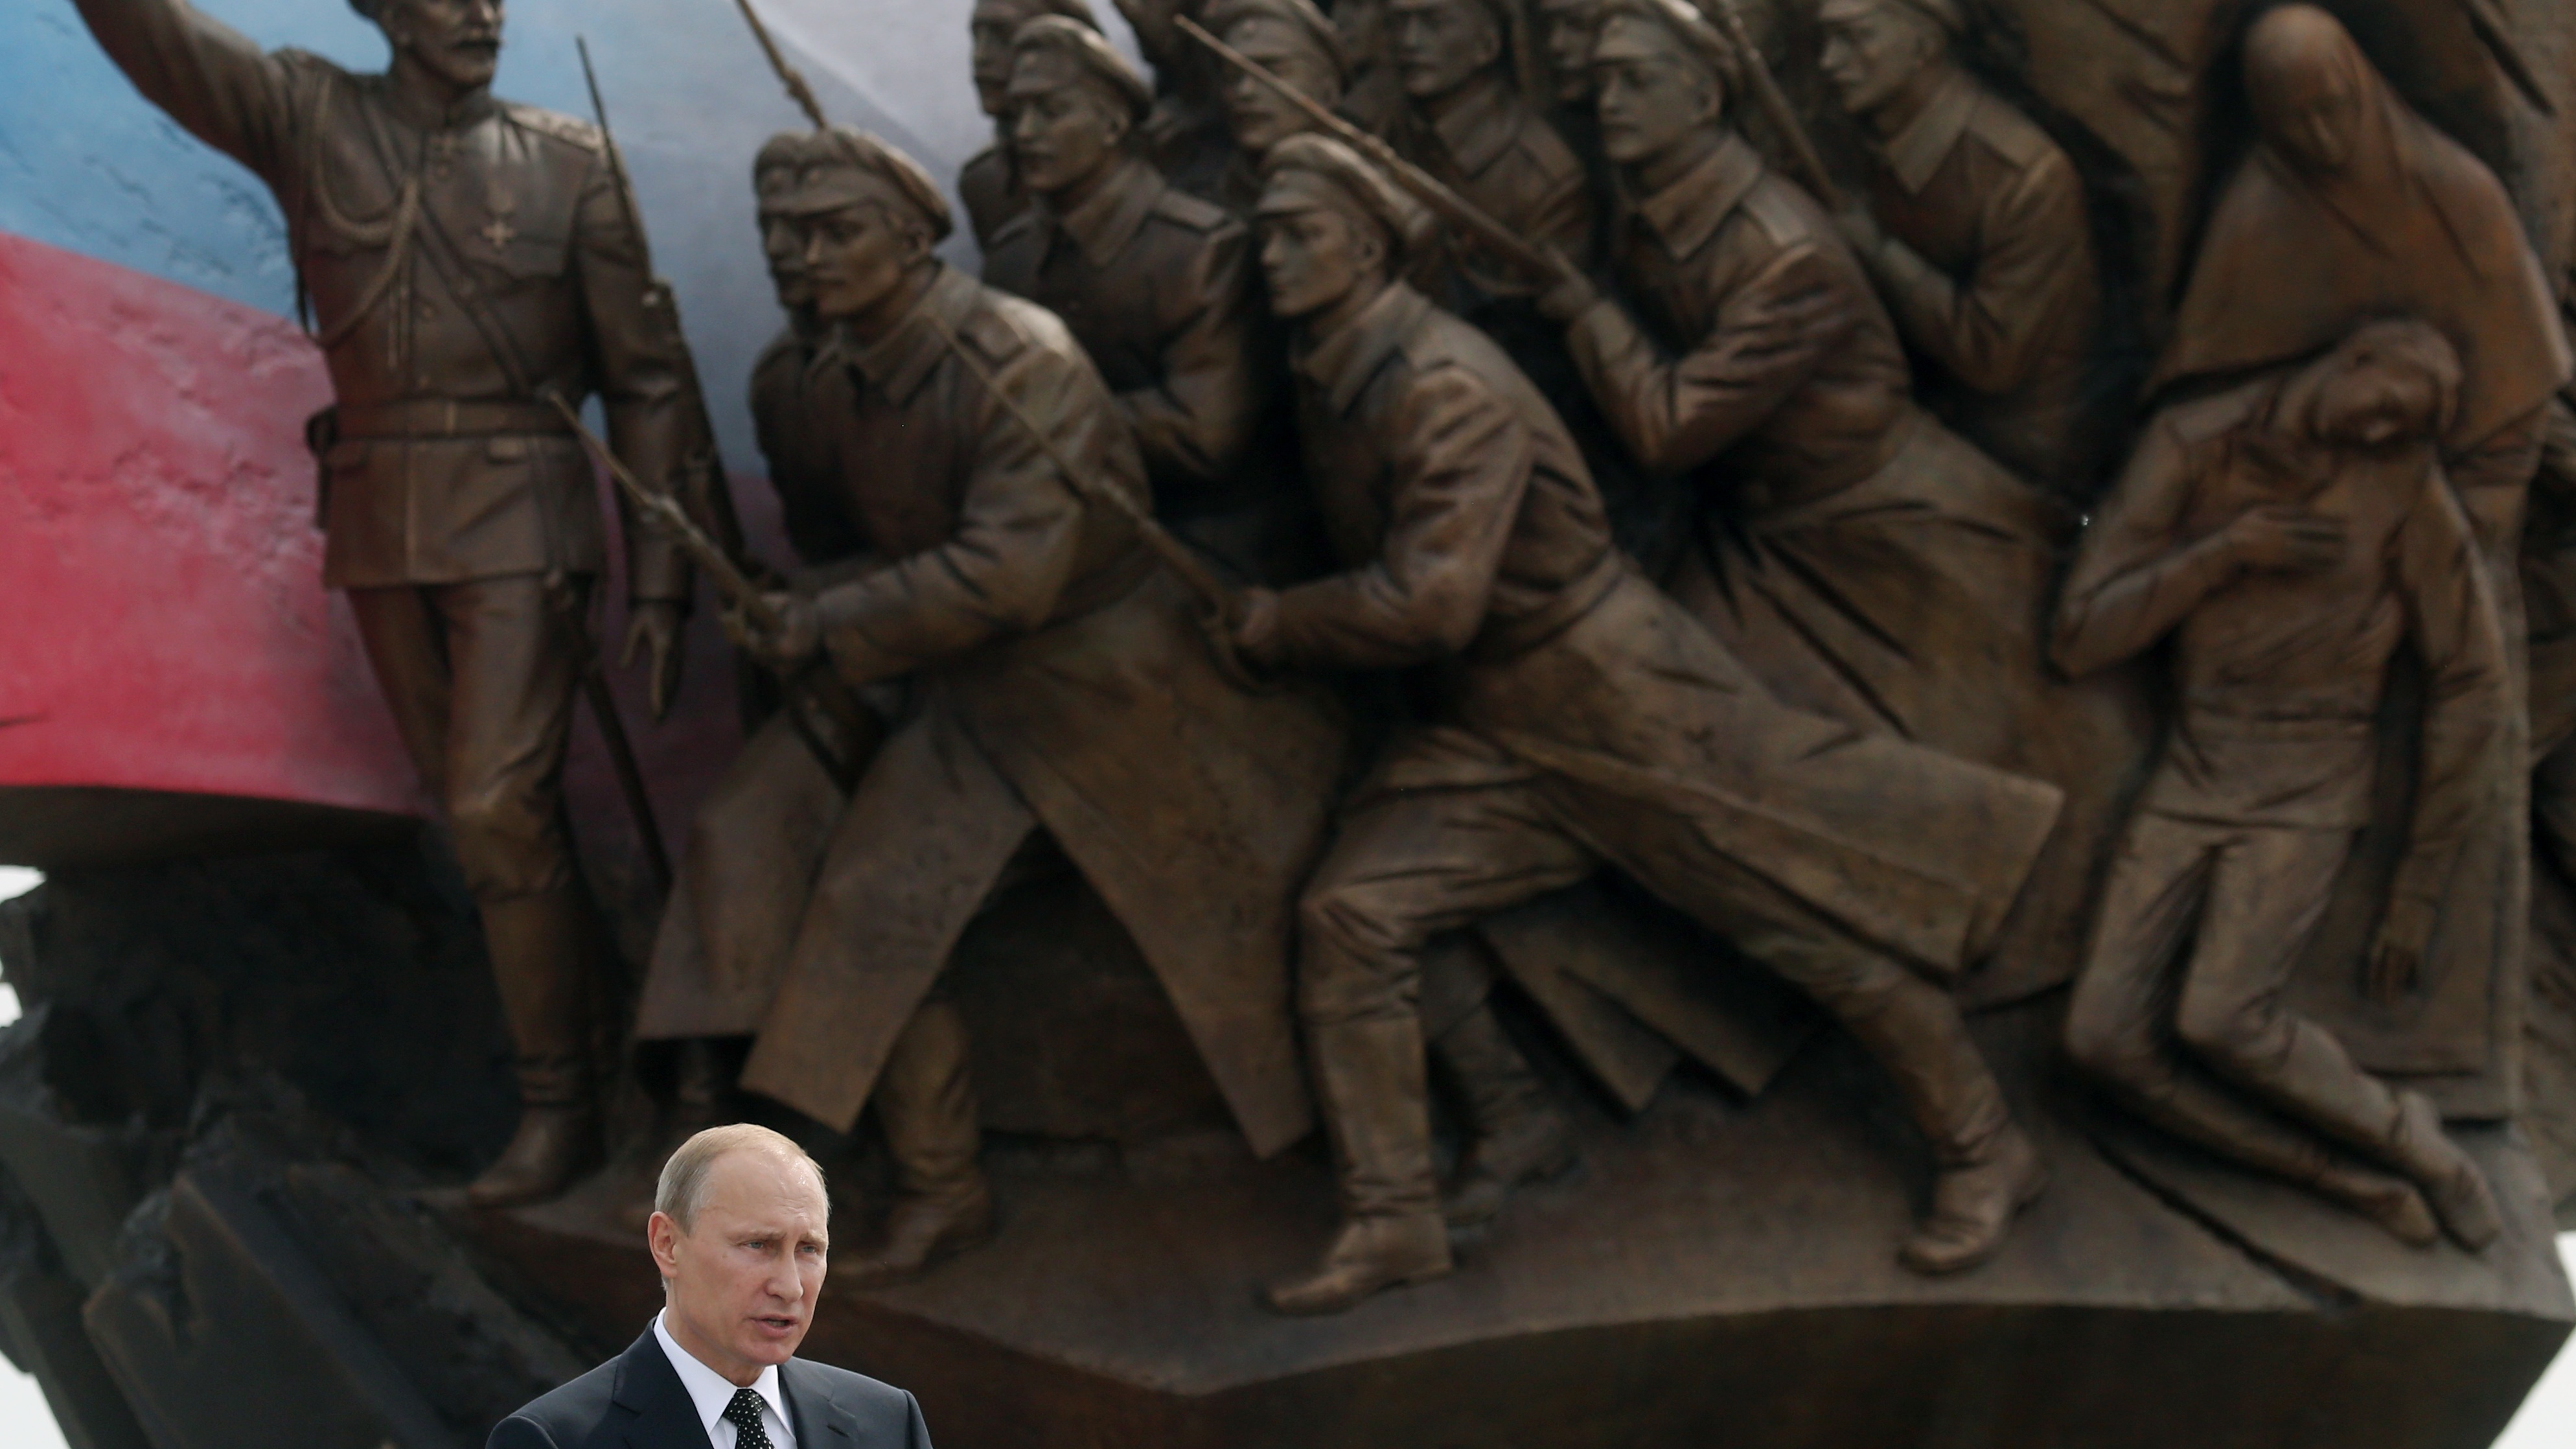 Vladimir Putin unveils a monument to Russian soldiers of the First World War in 2014 